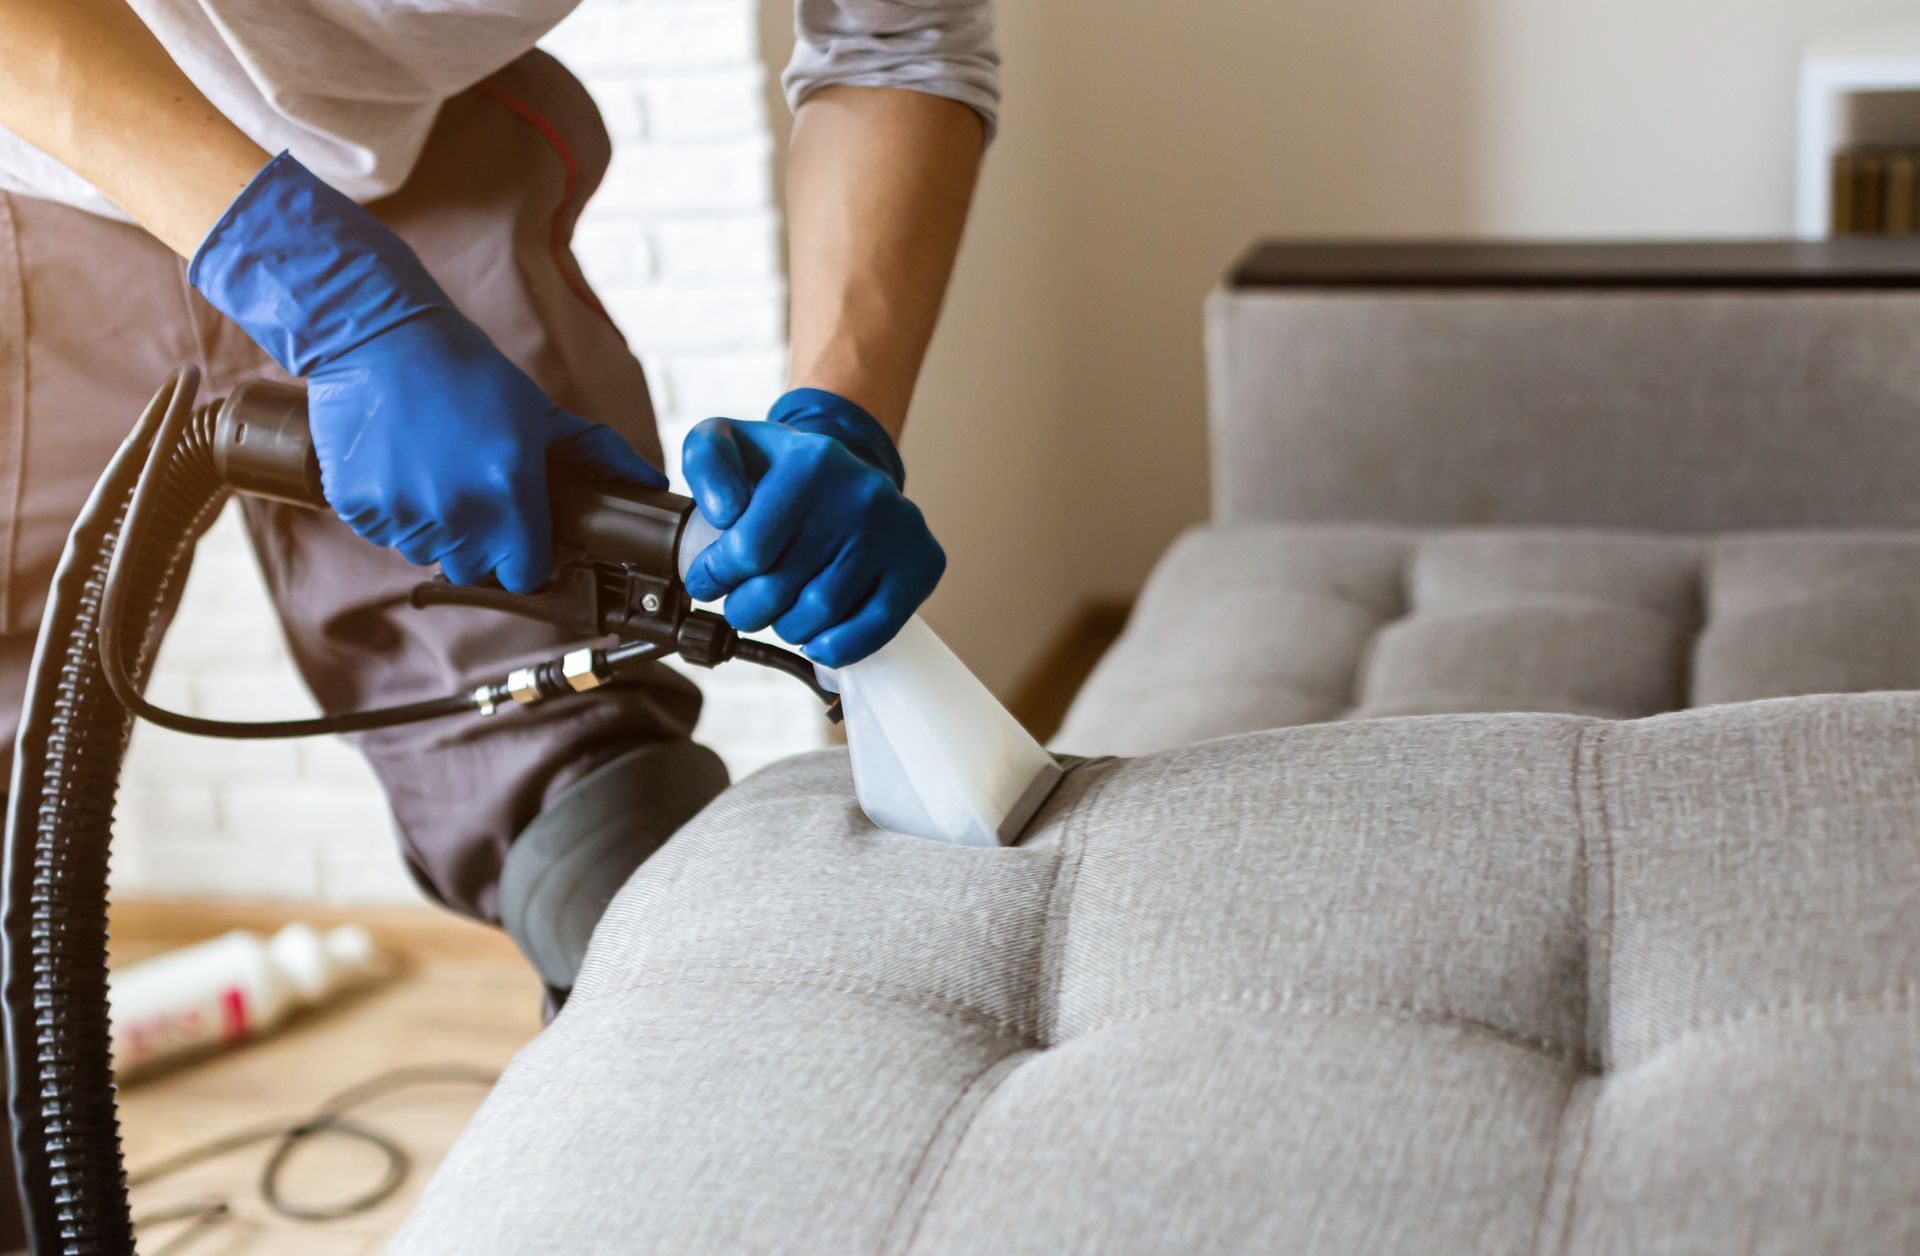 Two men are cleaning a couch with a vacuum cleaner